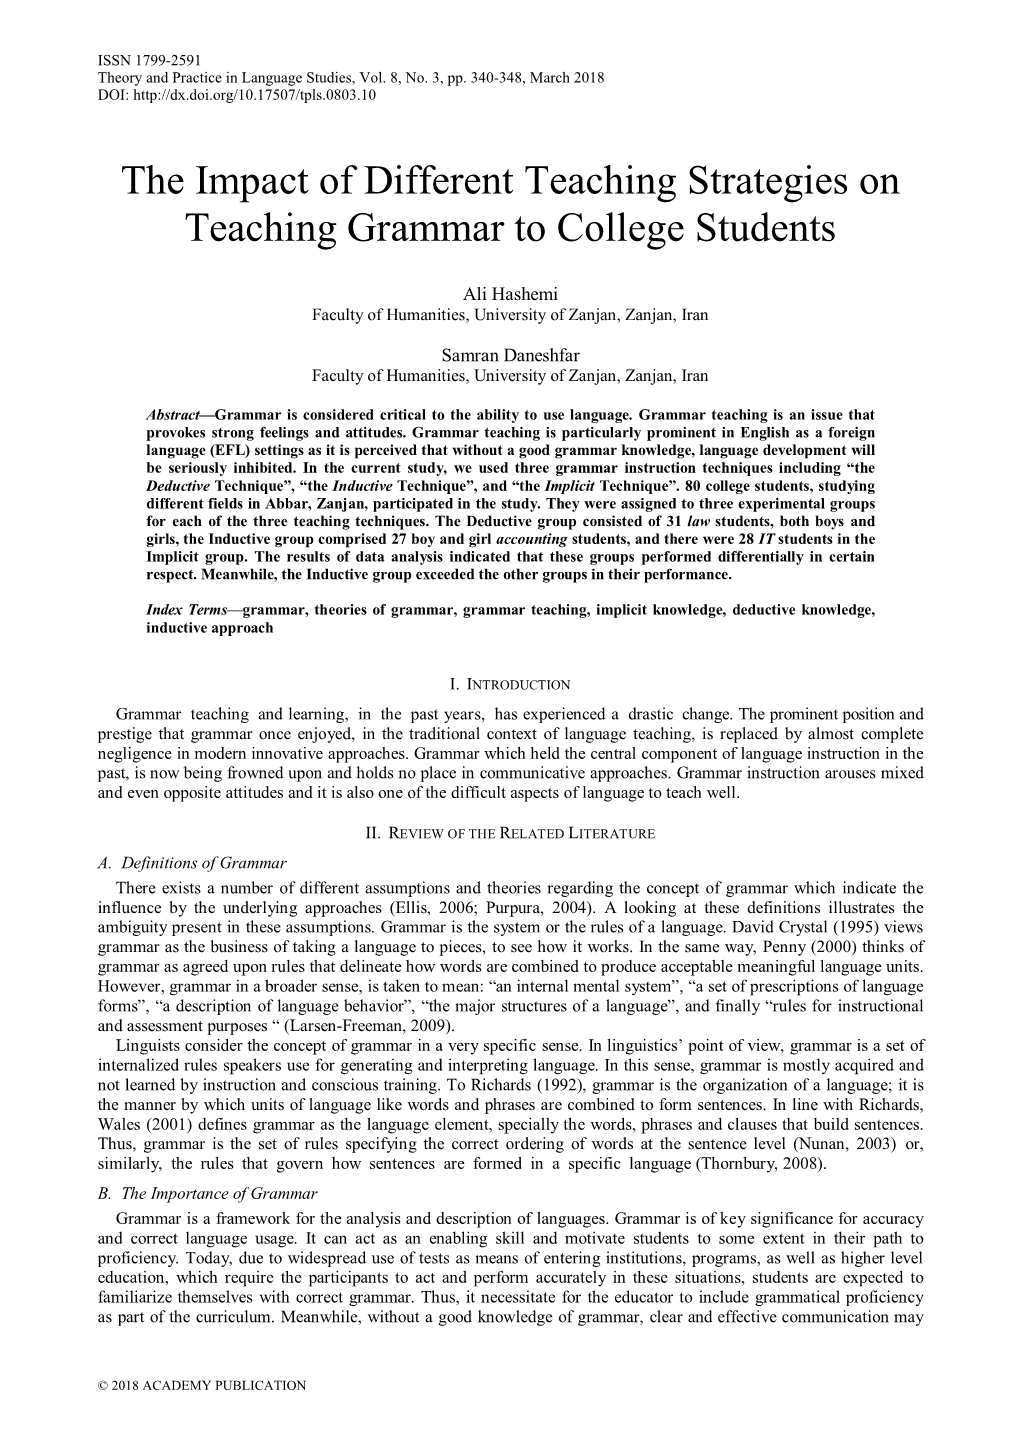 The Impact of Different Teaching Strategies on Teaching Grammar to College Students